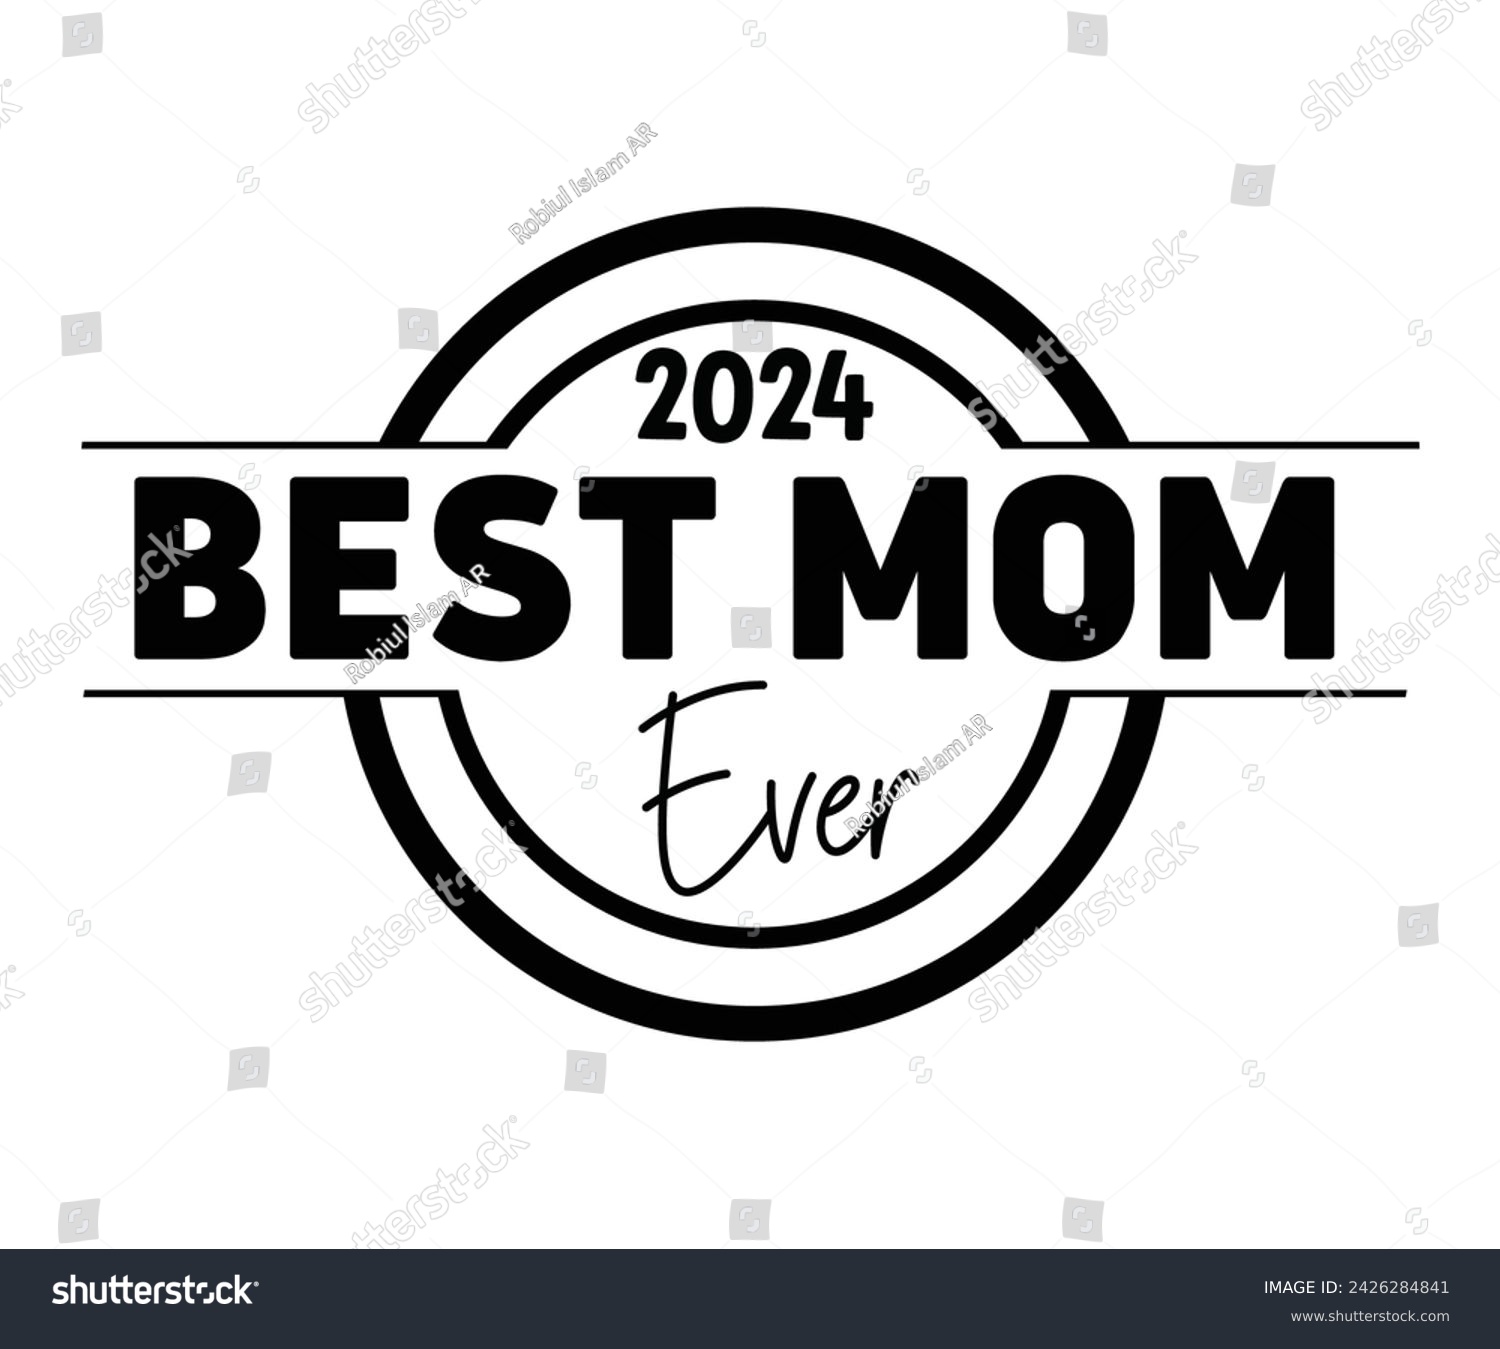 SVG of Best Mom Ever Typography, Svg,Retro, Png, Mother,s Day Svg,Mom Quotes, Funny Mom, T-Shirt Design, Cut File, Best Mama, Coolest Mom, Best Dogs,Best Cat, Doxie Mom, Ever, Happiness svg